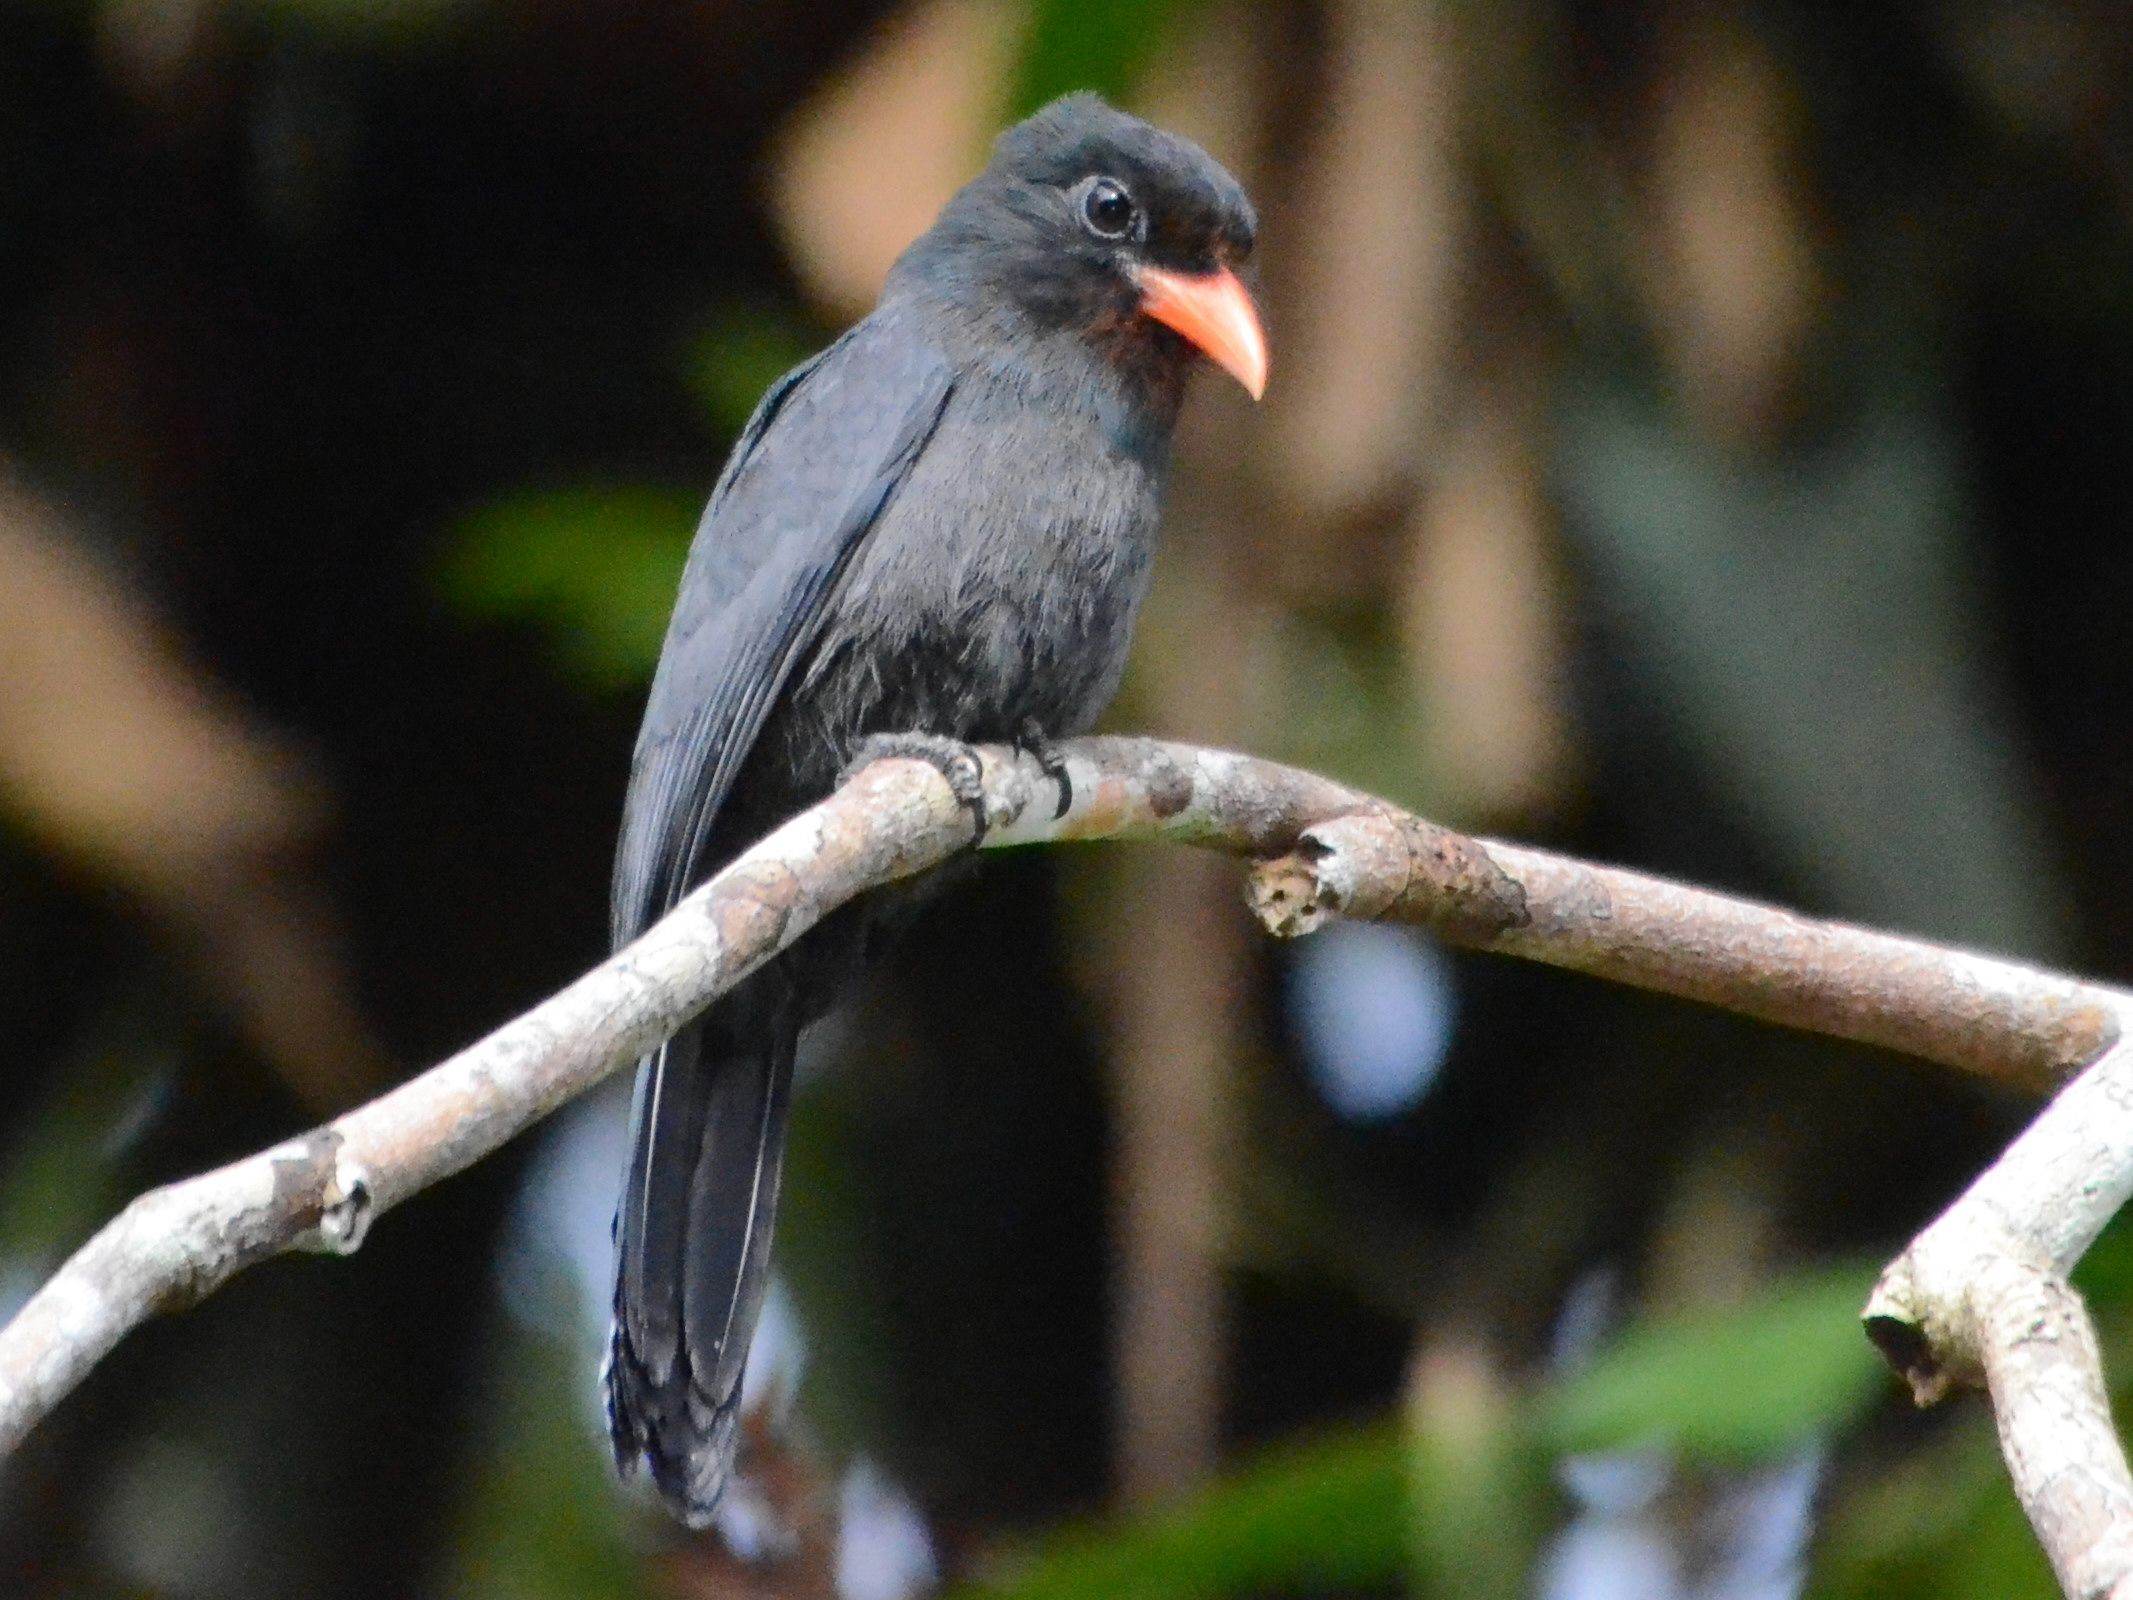 Click picture to see more Black-fronted Nunbirds.